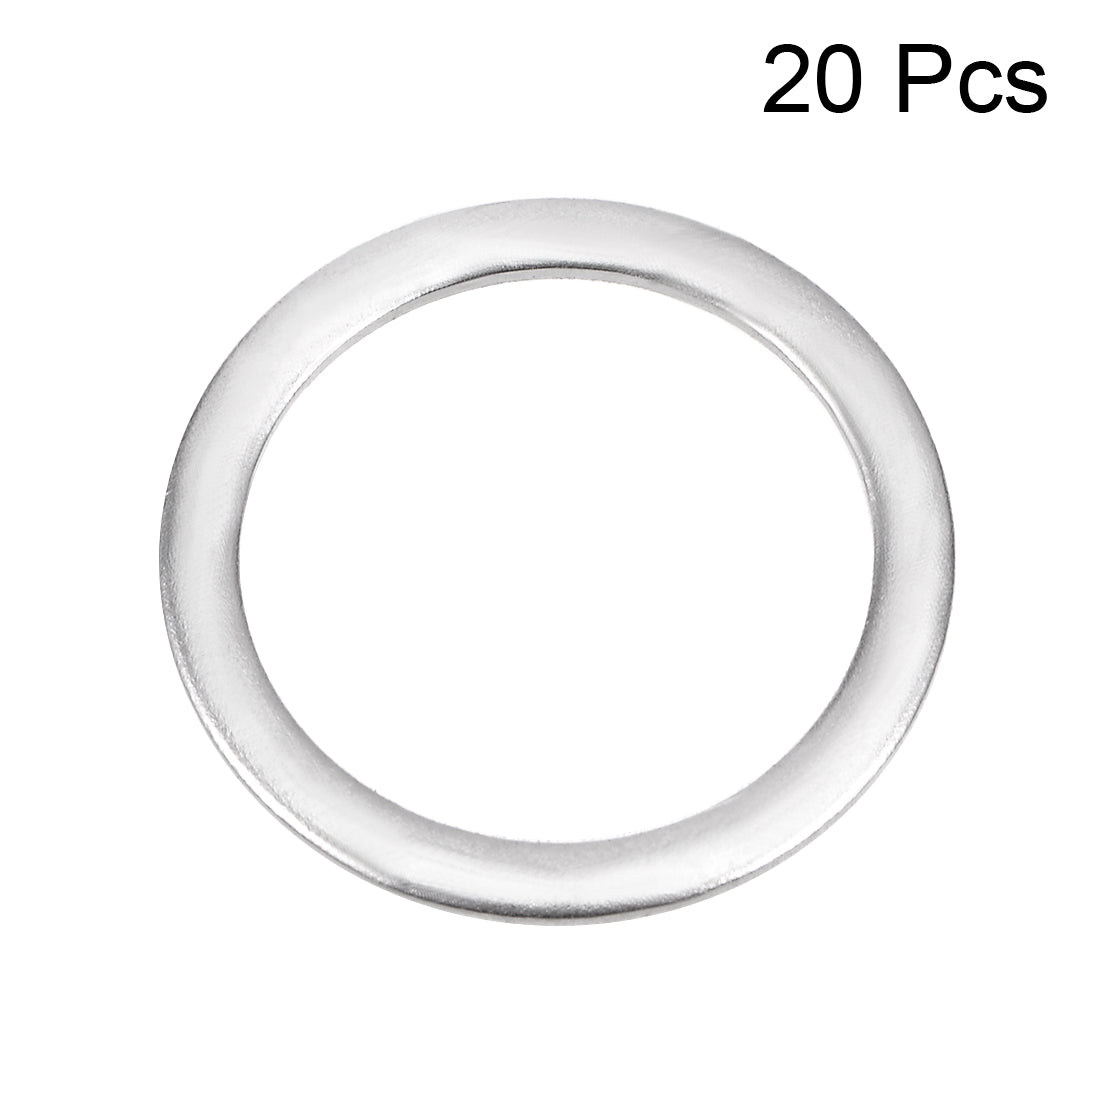 uxcell Uxcell 20Pcs 12mm x 16mm x 0.8mm 304 Stainless Steel Flat Washer for Screw Bolt